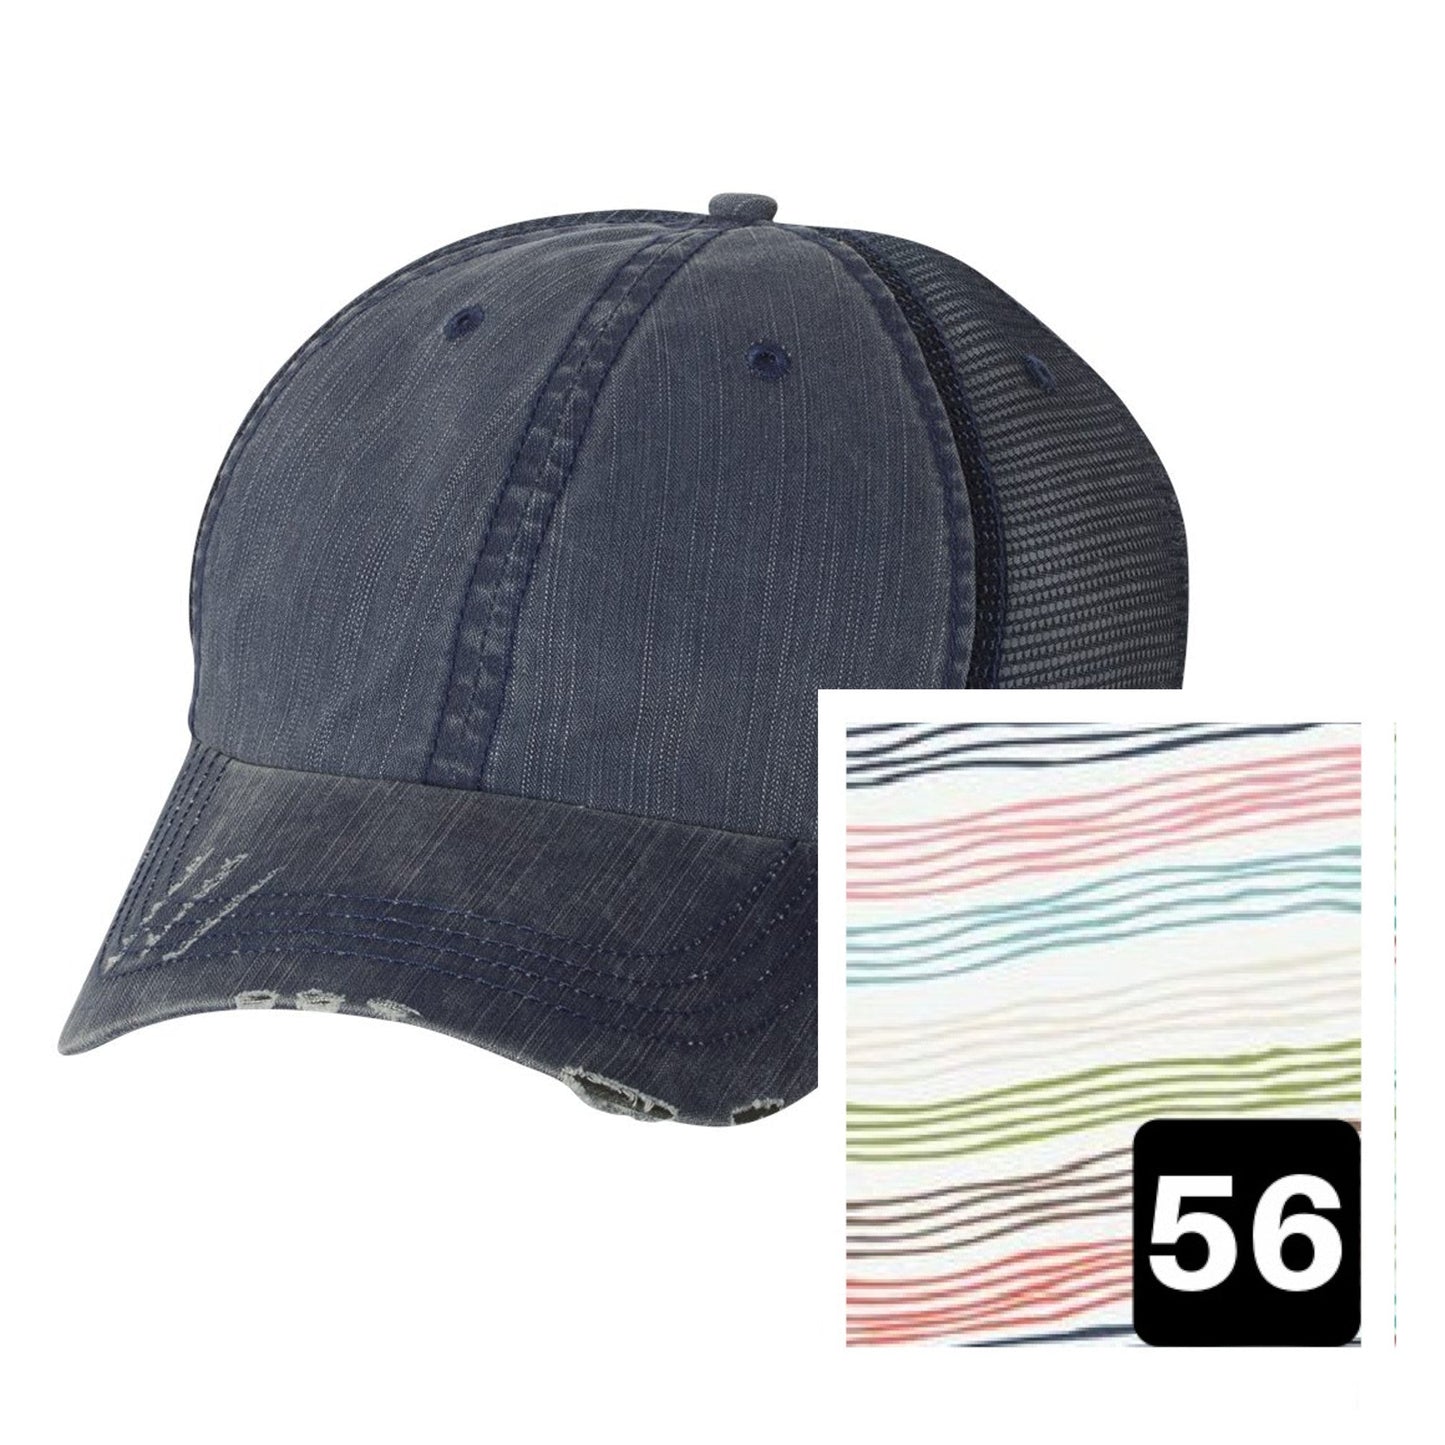 Wisconsin Hat | Navy Distressed Trucker Cap | Many Fabric Choices